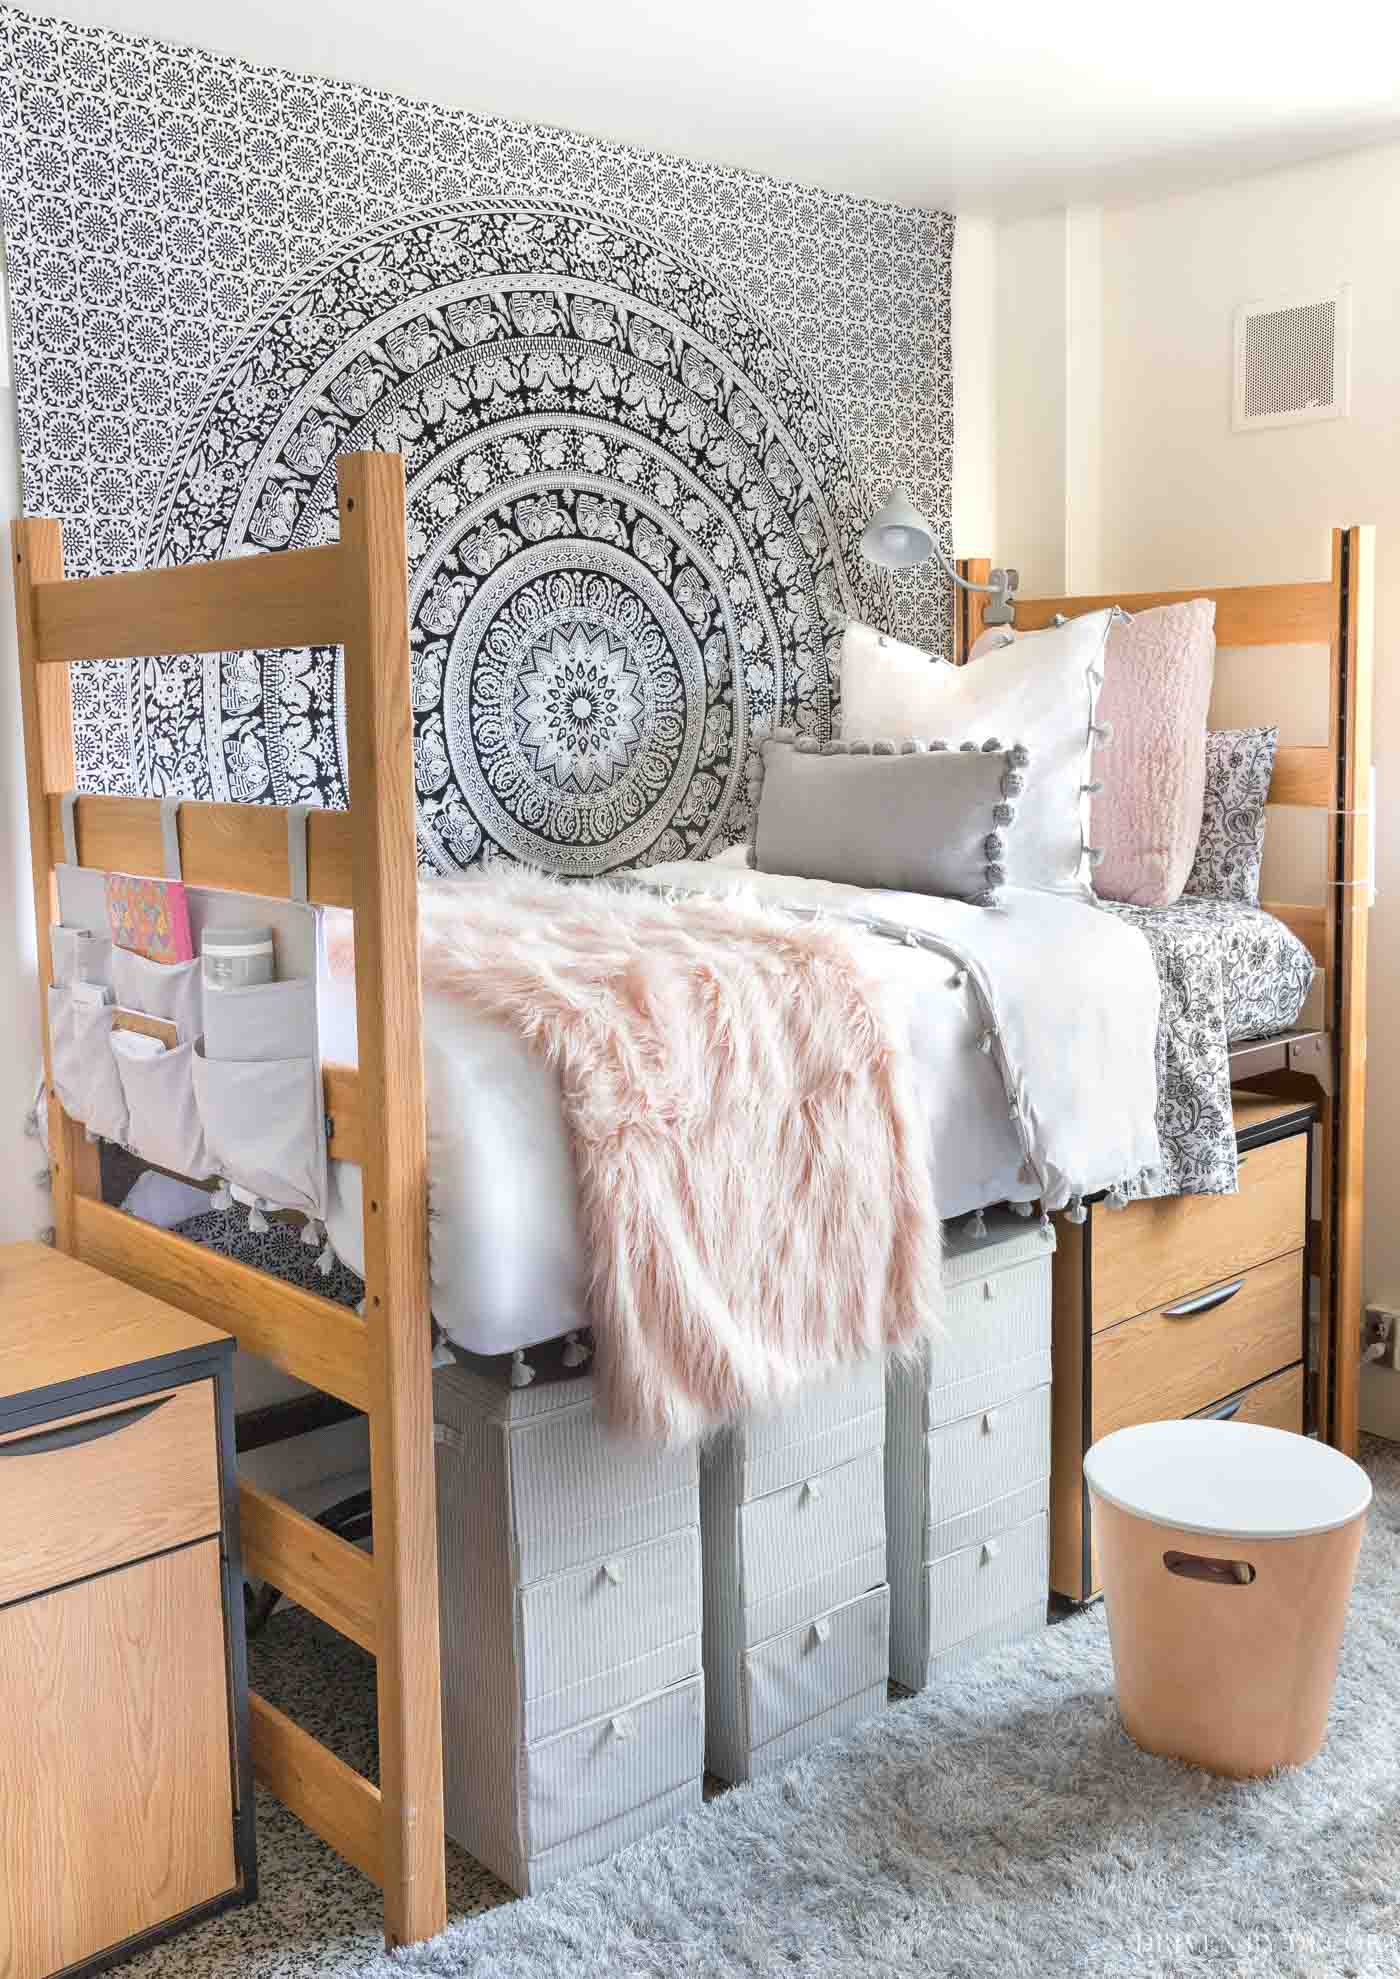 Dorm Room Ideas for Girls from Our "Before" & "After" Dorm Room